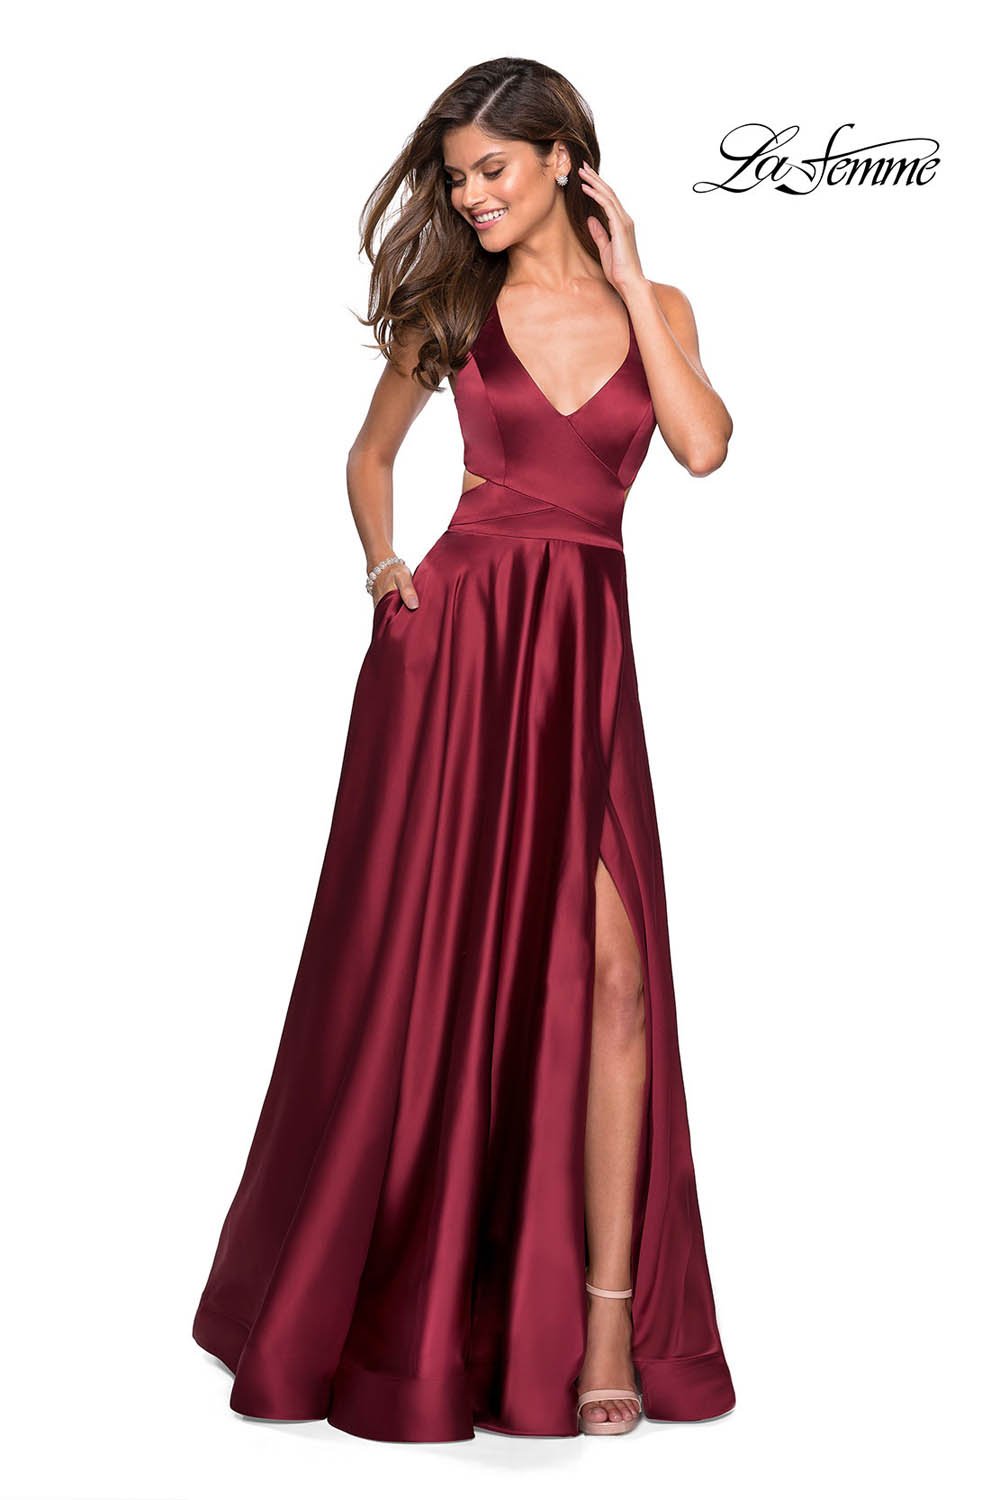 La Femme 27487 dress images in these colors: Deep Red, Navy.